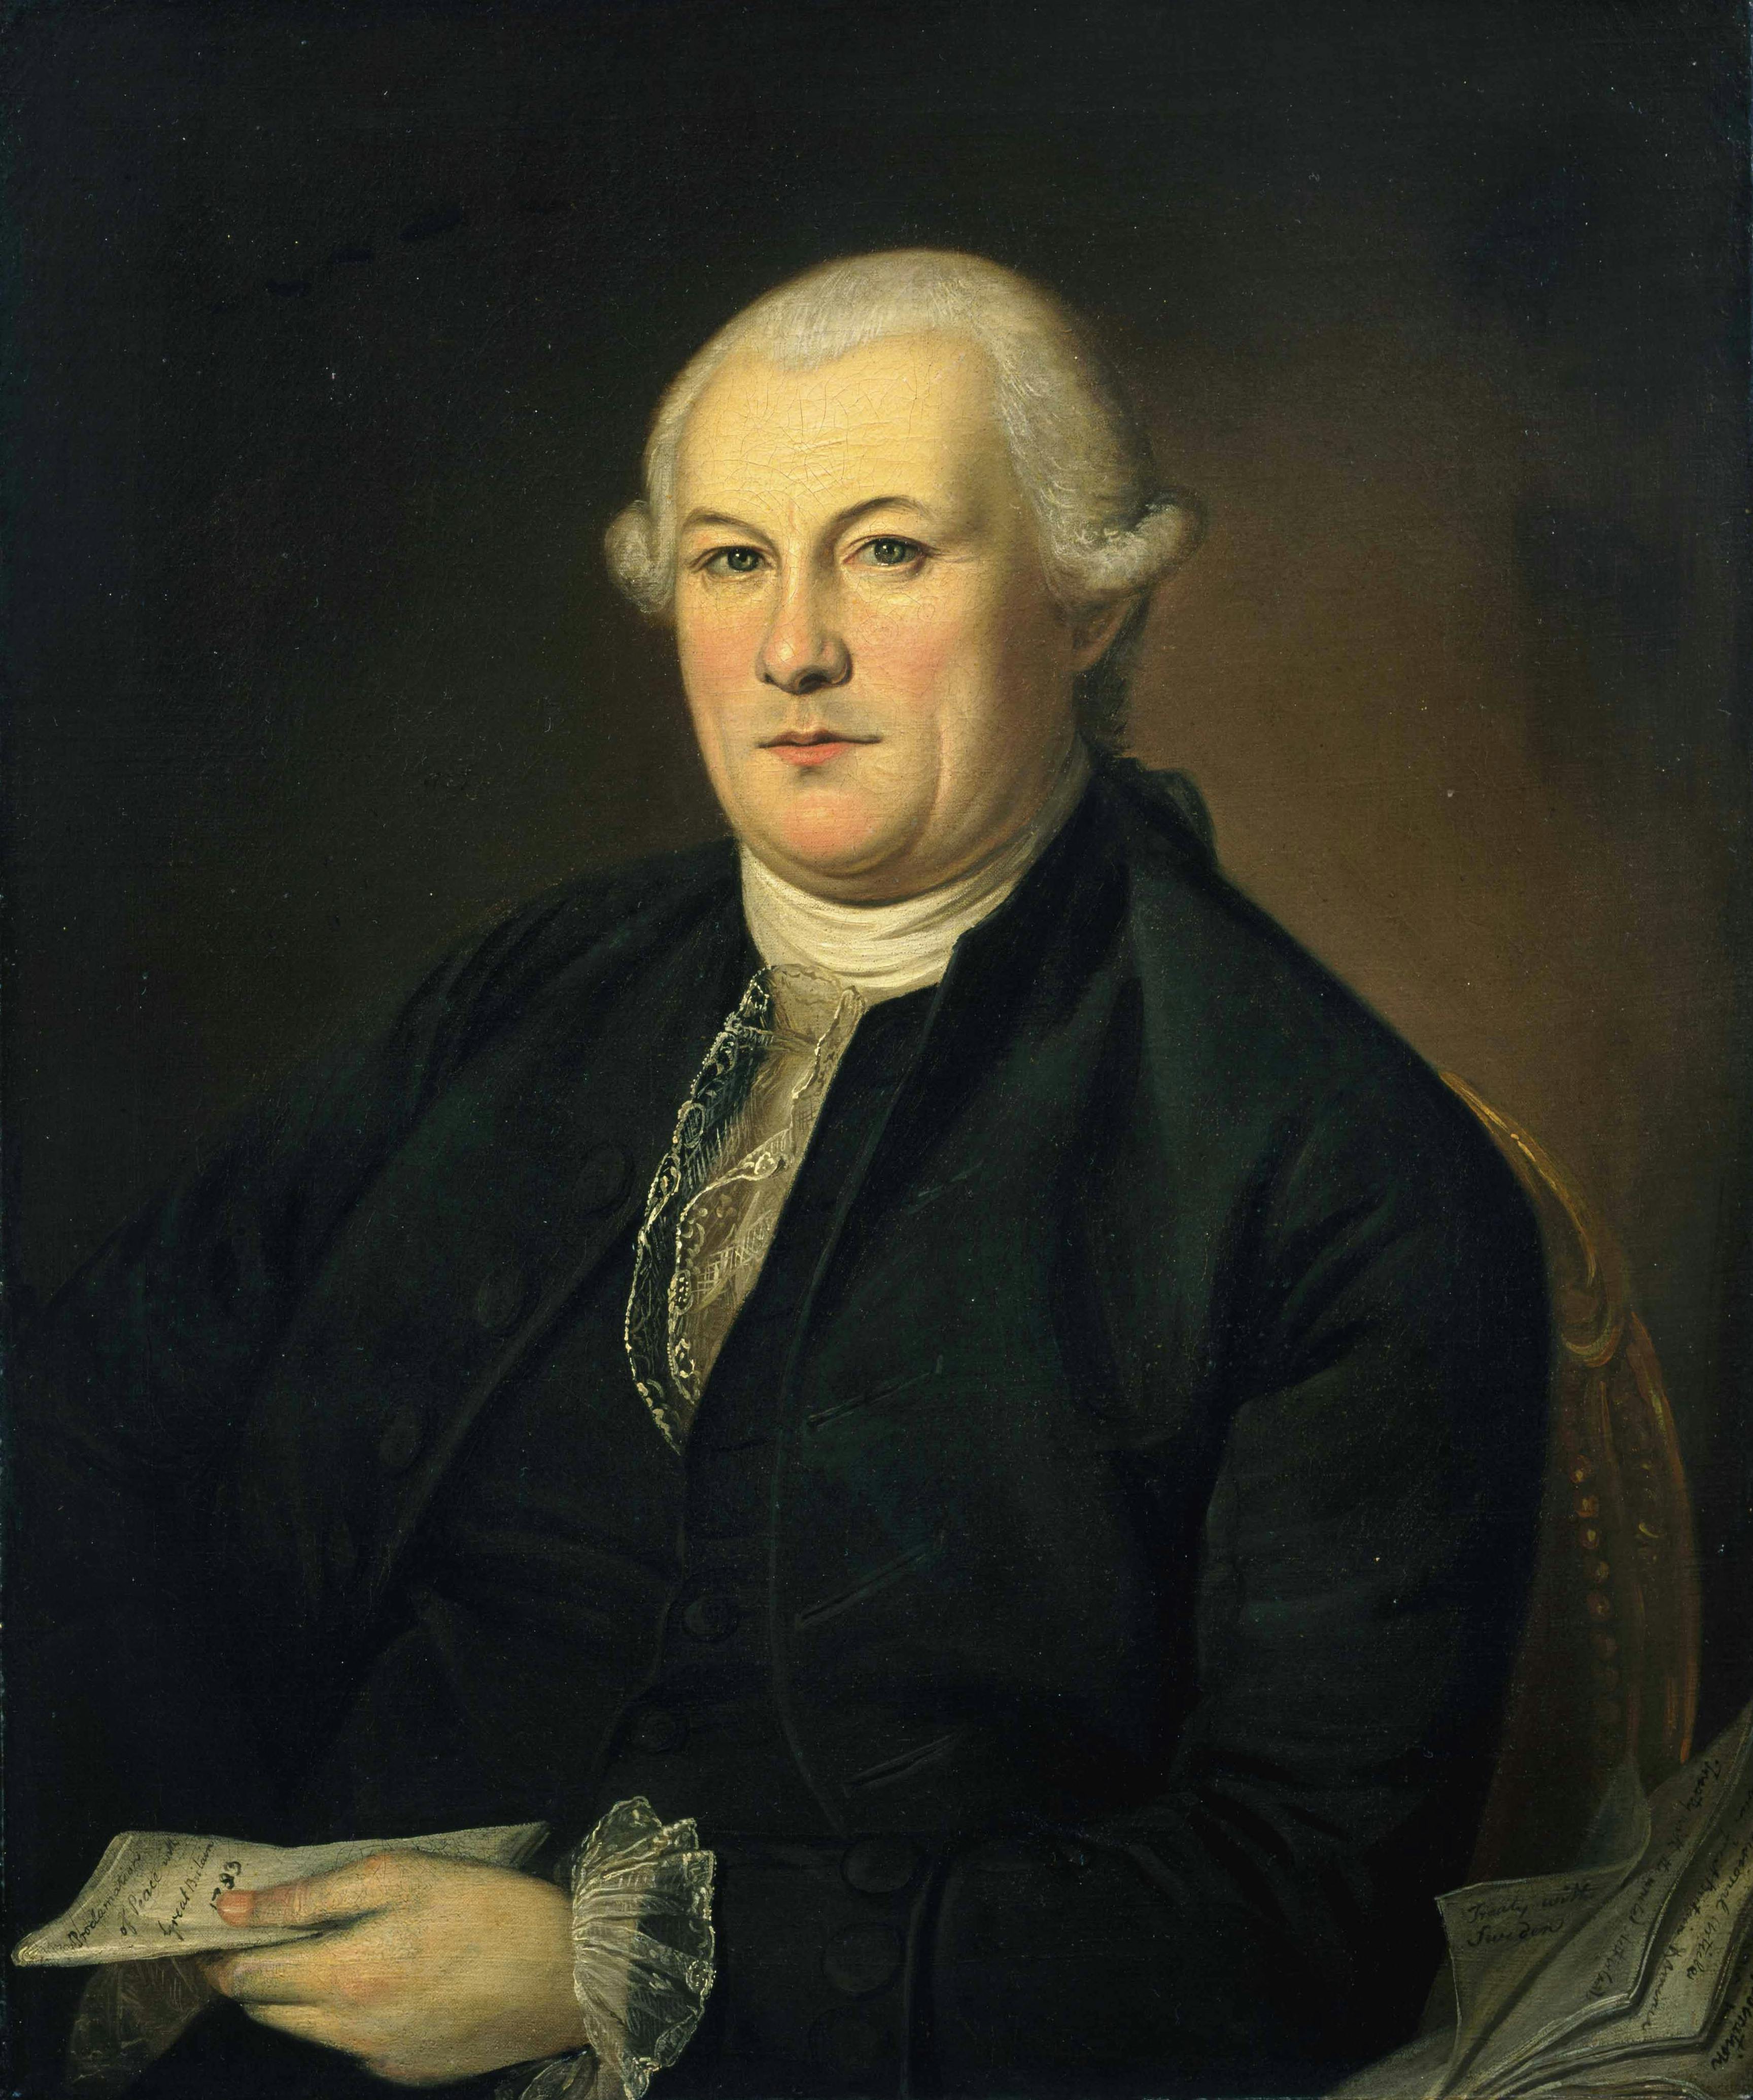 Portrait of Elias Boudinot by Charles Willson Peale.